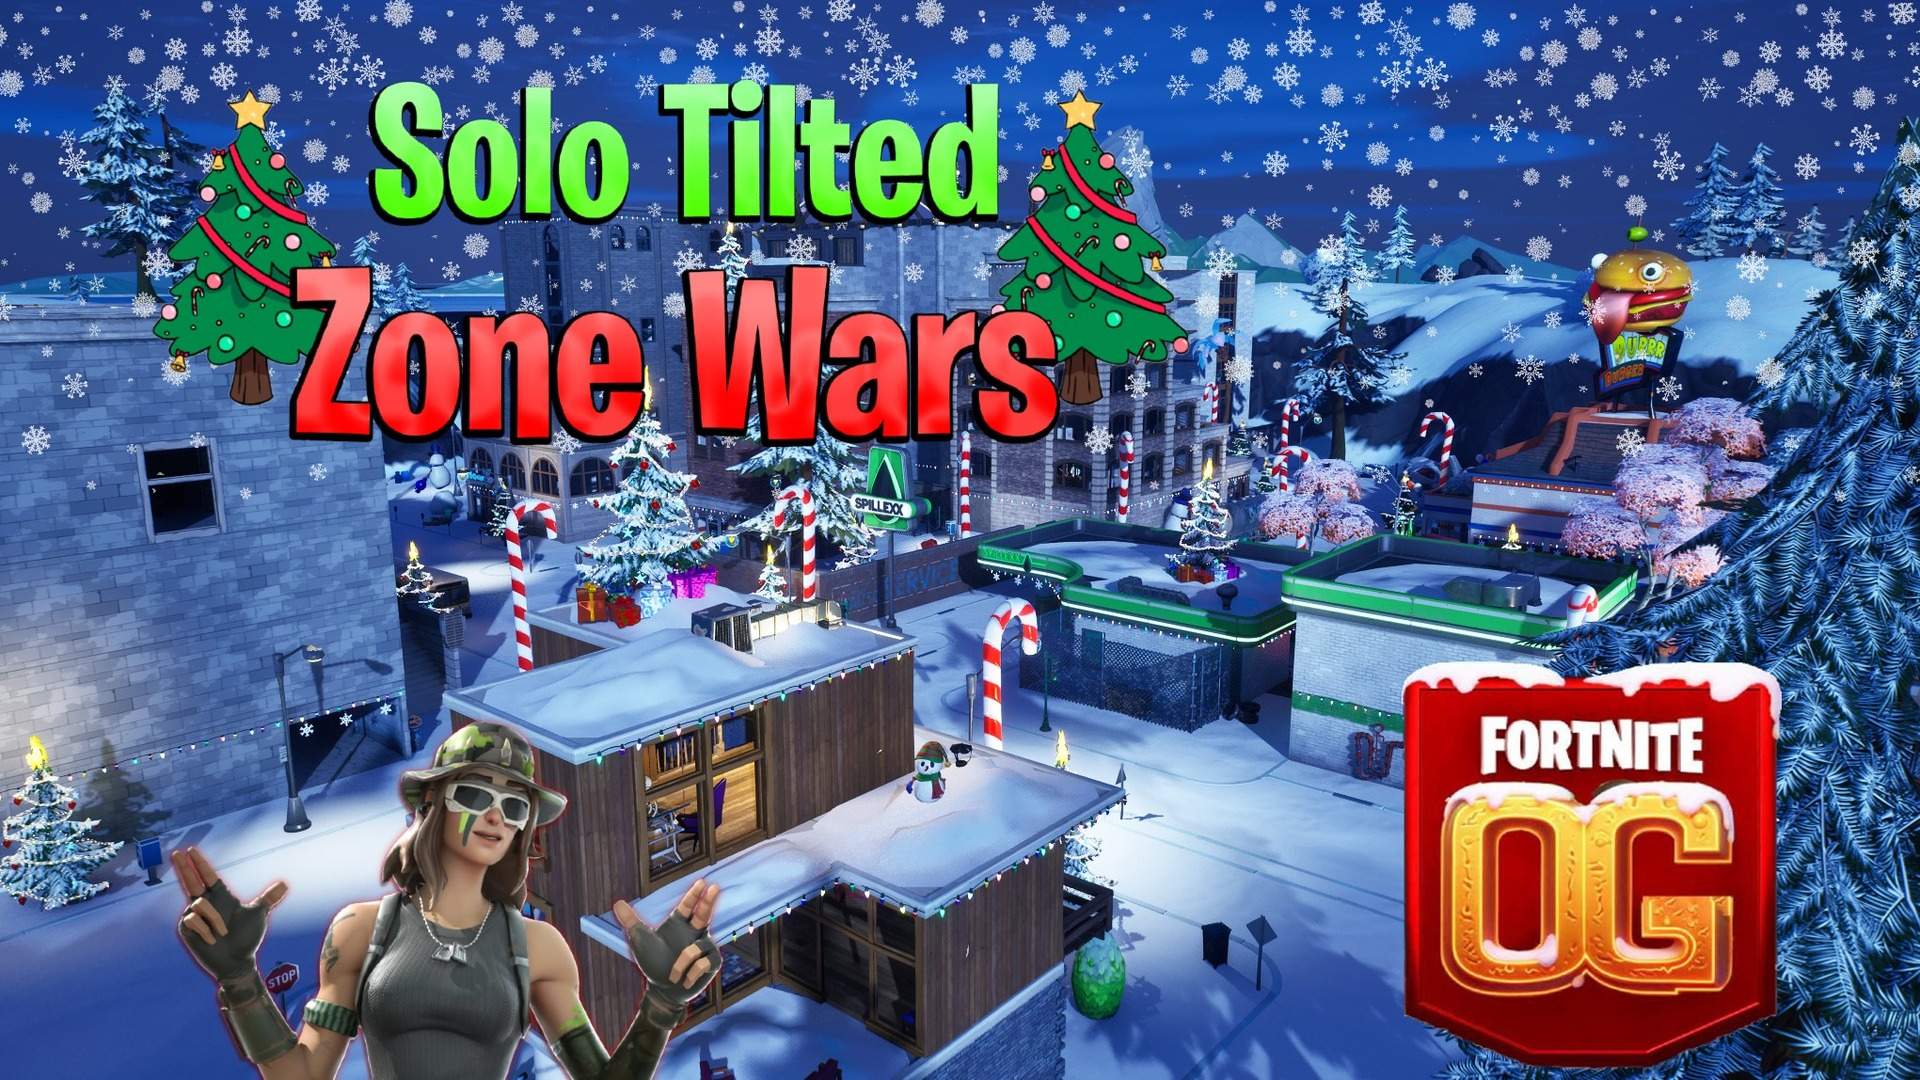 Solo Tilted Zone Wars🎄